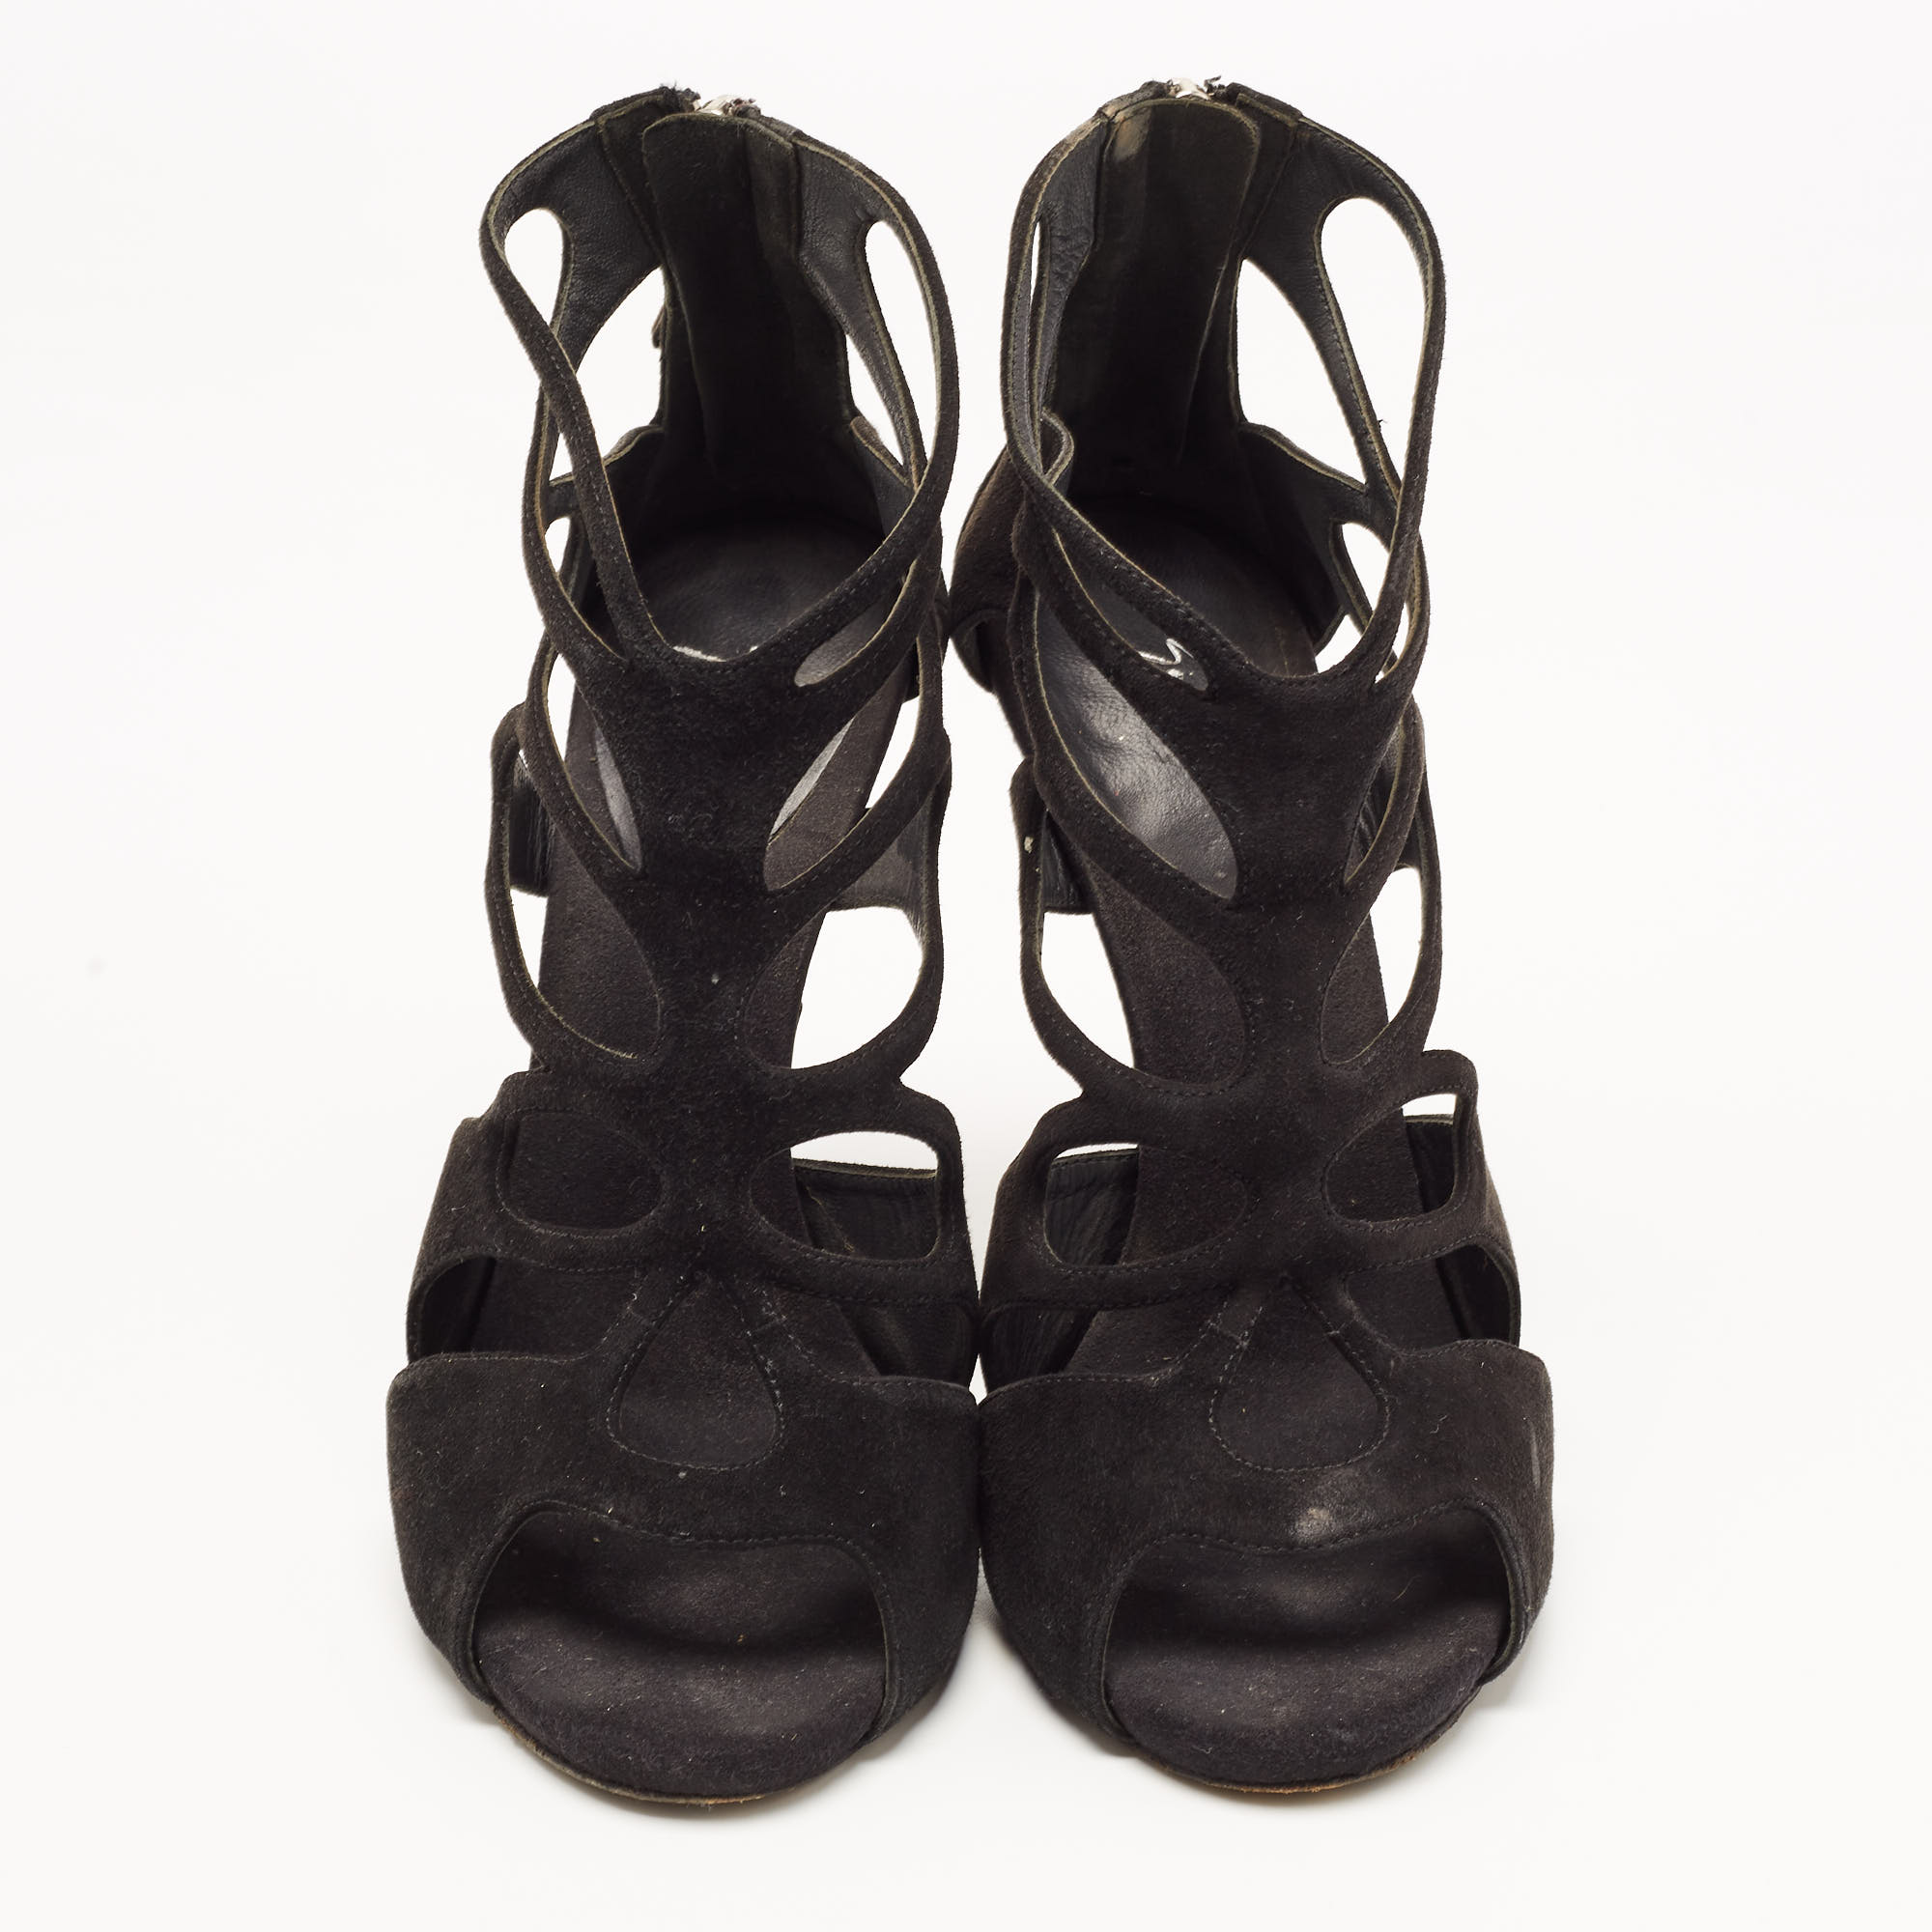 Giuseppe Zanotti Black Suede Cut Out Ankle Strap Sandals Size 37